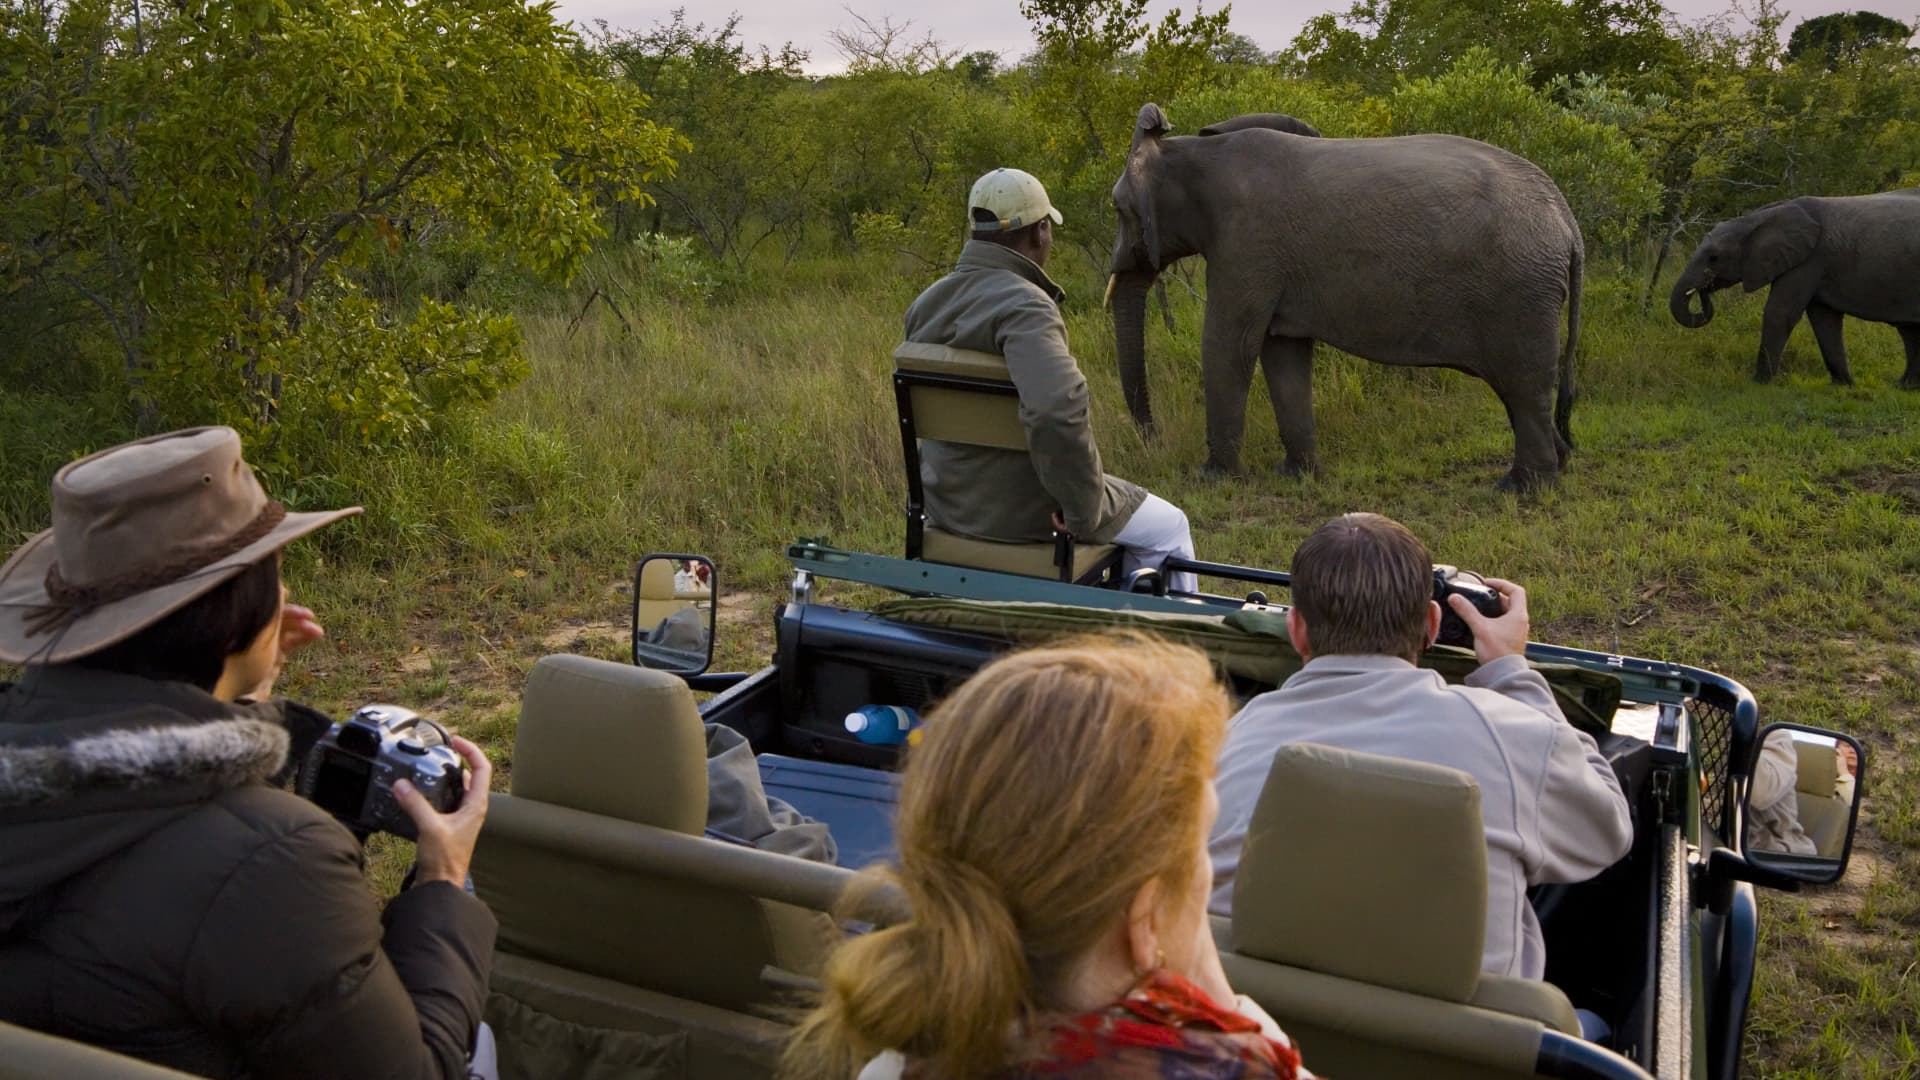 A game drive at Kruger National Park, South Africa.